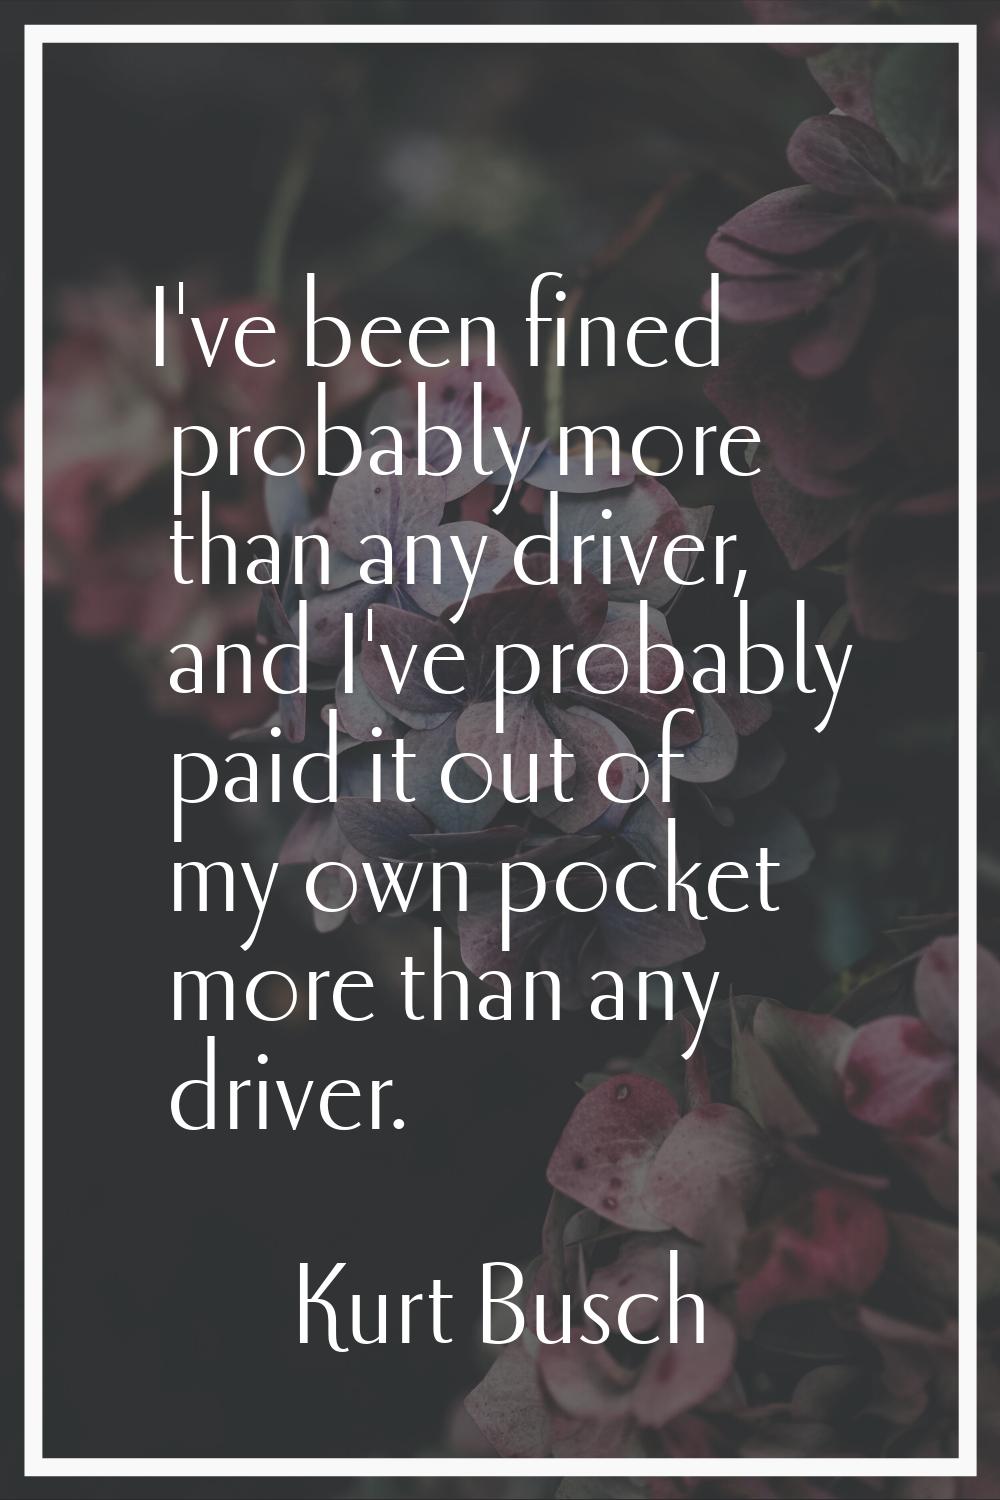 I've been fined probably more than any driver, and I've probably paid it out of my own pocket more 